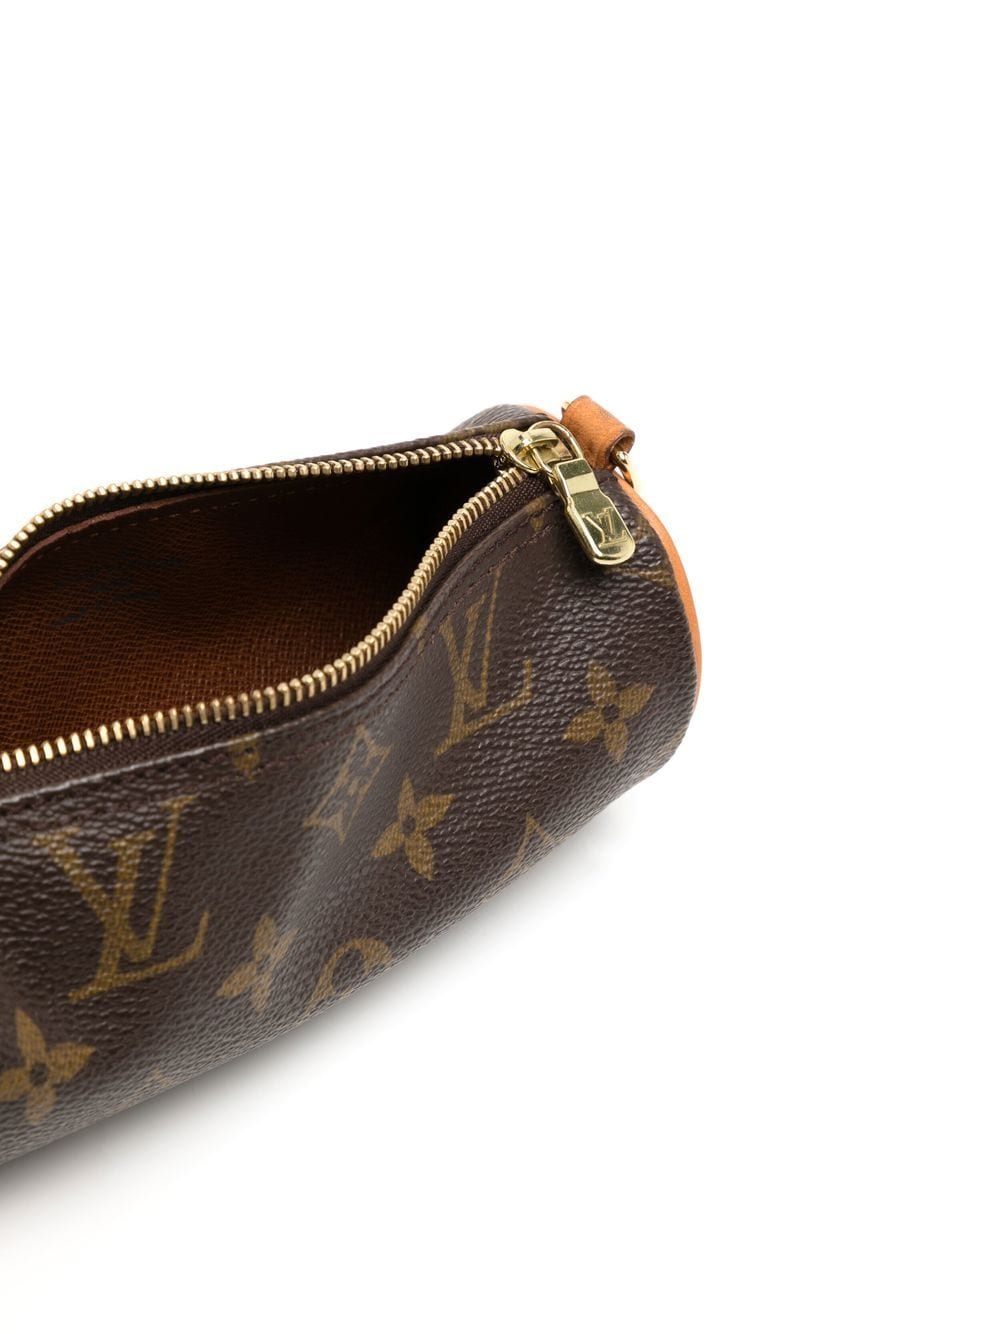 Louis Vuitton Round Case Monogram Brown in Canvas/Leather with